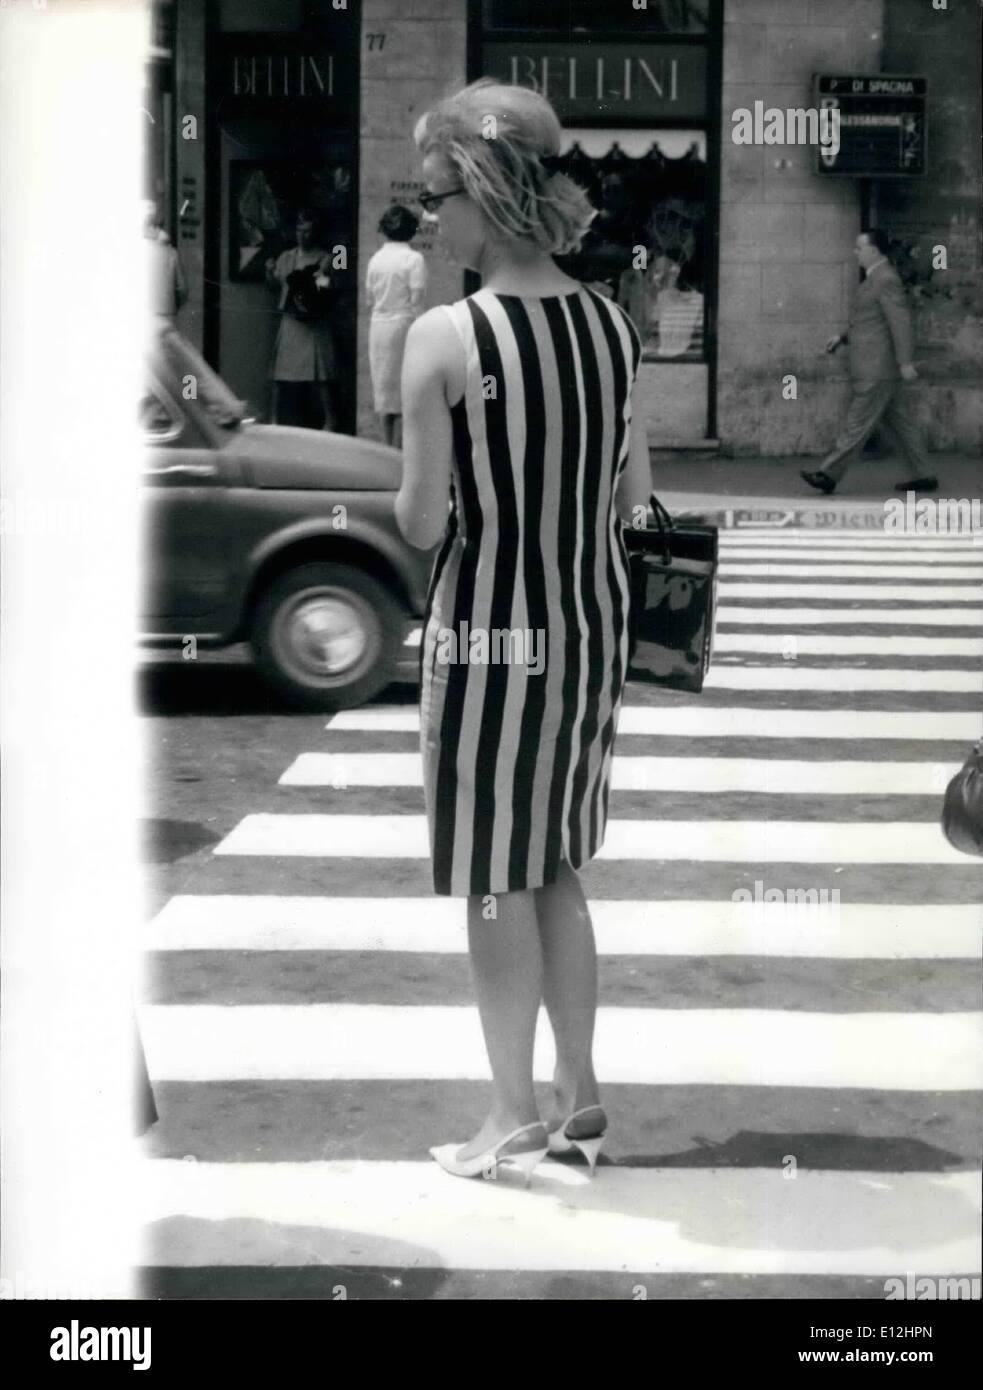 Jan. 04, 2012 - Symphony in black and white: The black and white stripes of this lady dress makes contrast on the striped pedestrian passage on Piazza Di Spagnanseen this morning during walk on the beautiful and colorfull square. Stock Photo